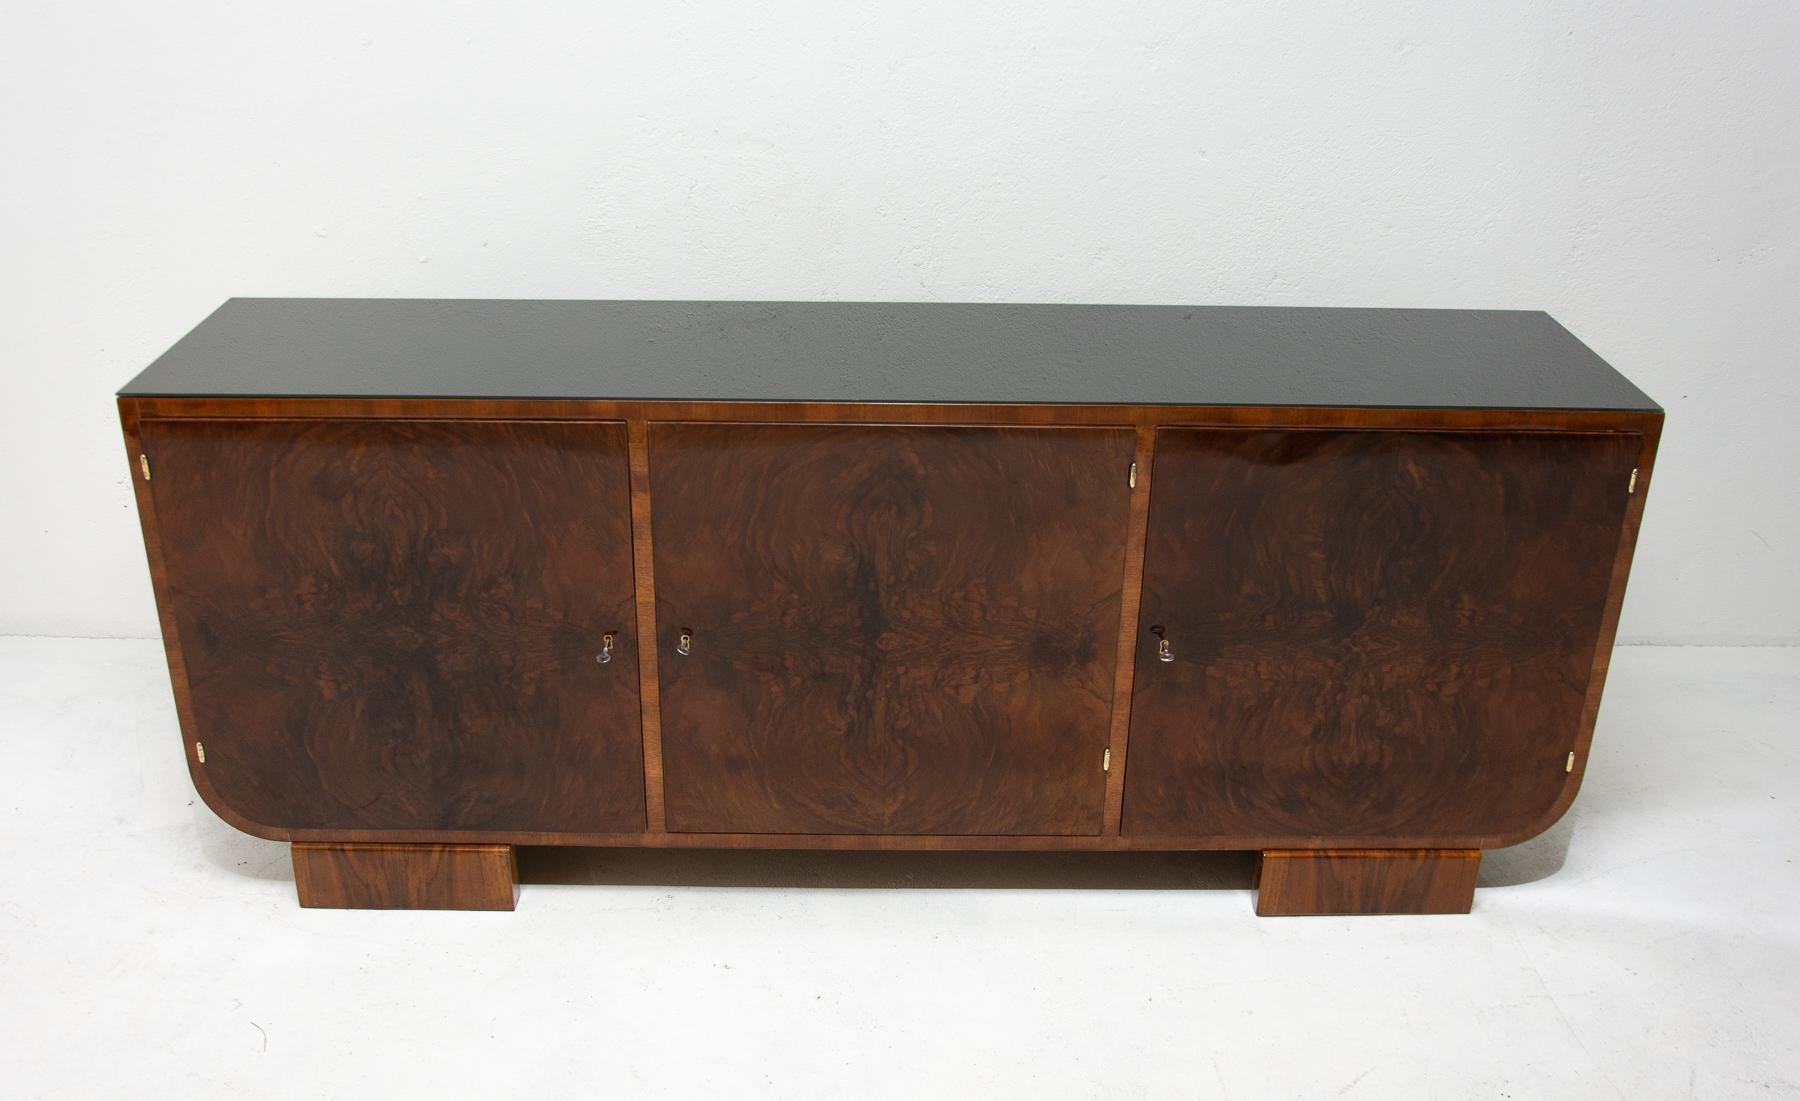 This sideboard was made in Bohemia in the 1930s. It´s an example of Central European functionalism and is made of solid wood and veneered in walnut. It features a storage space divided to three parts and the top is covered with a black glass. The